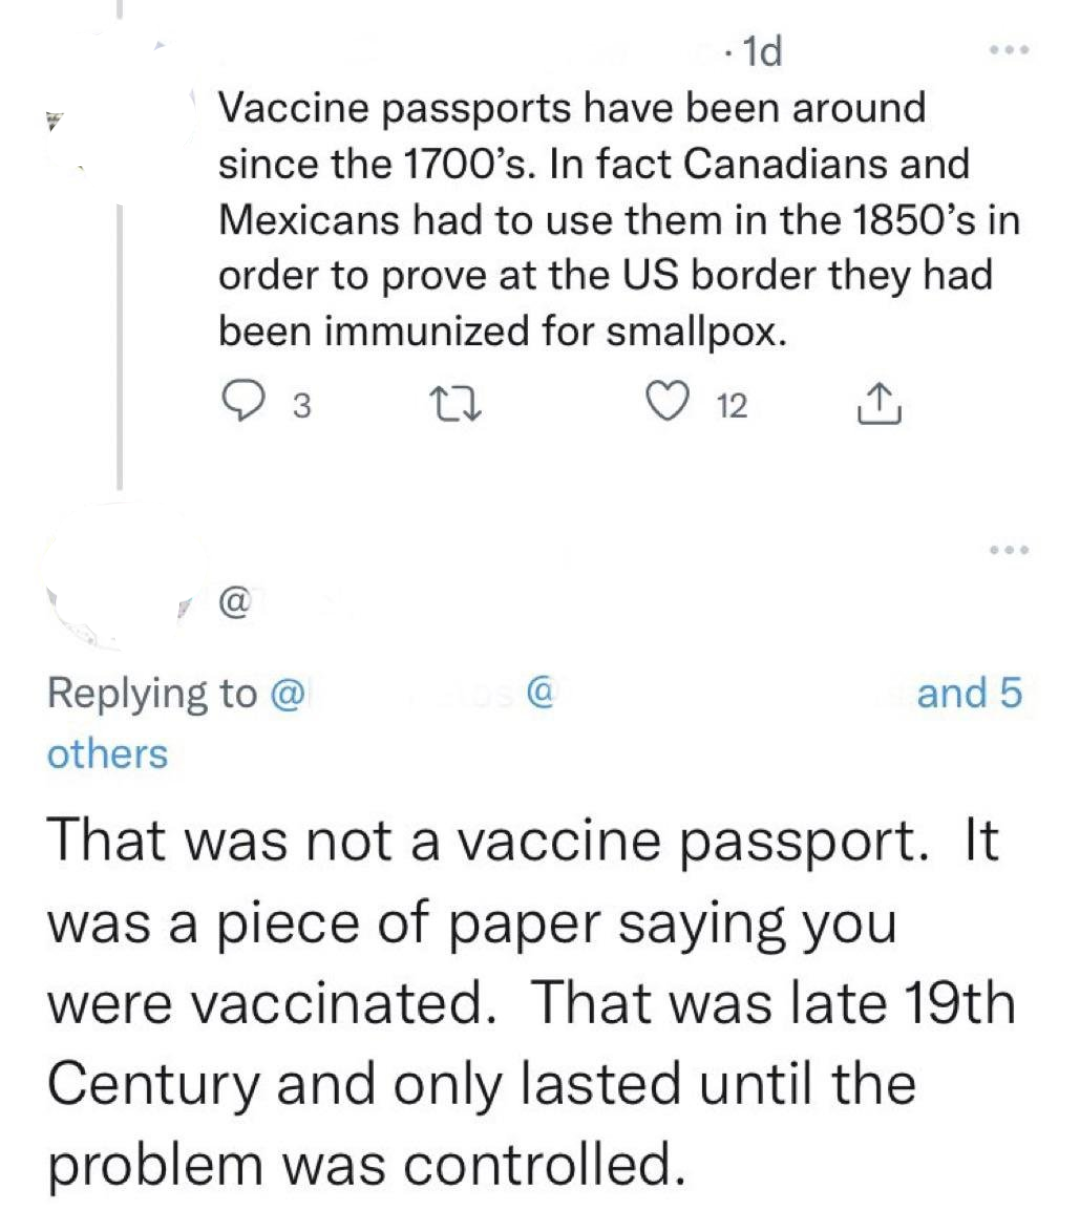 one person says vaccine passports have been around since 1700s, and another person replies saying that wasn&#x27;t a vaccine passport, that was a piece of paper saying you were vaccinated, and it only lasted until the problem was controlled